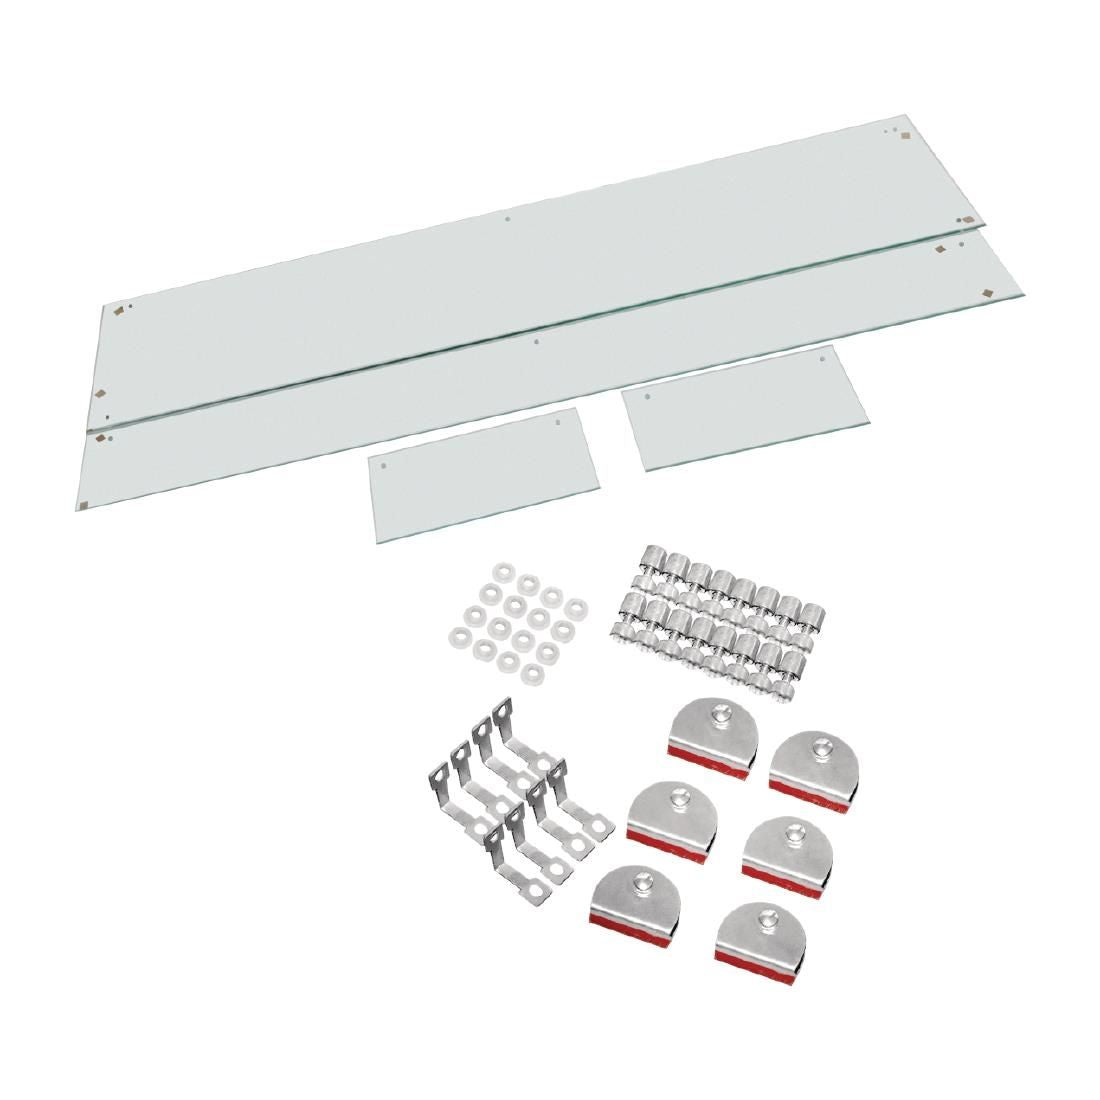 AH007 Polar Replacement Glass Kit incl Fixing JD Catering Equipment Solutions Ltd